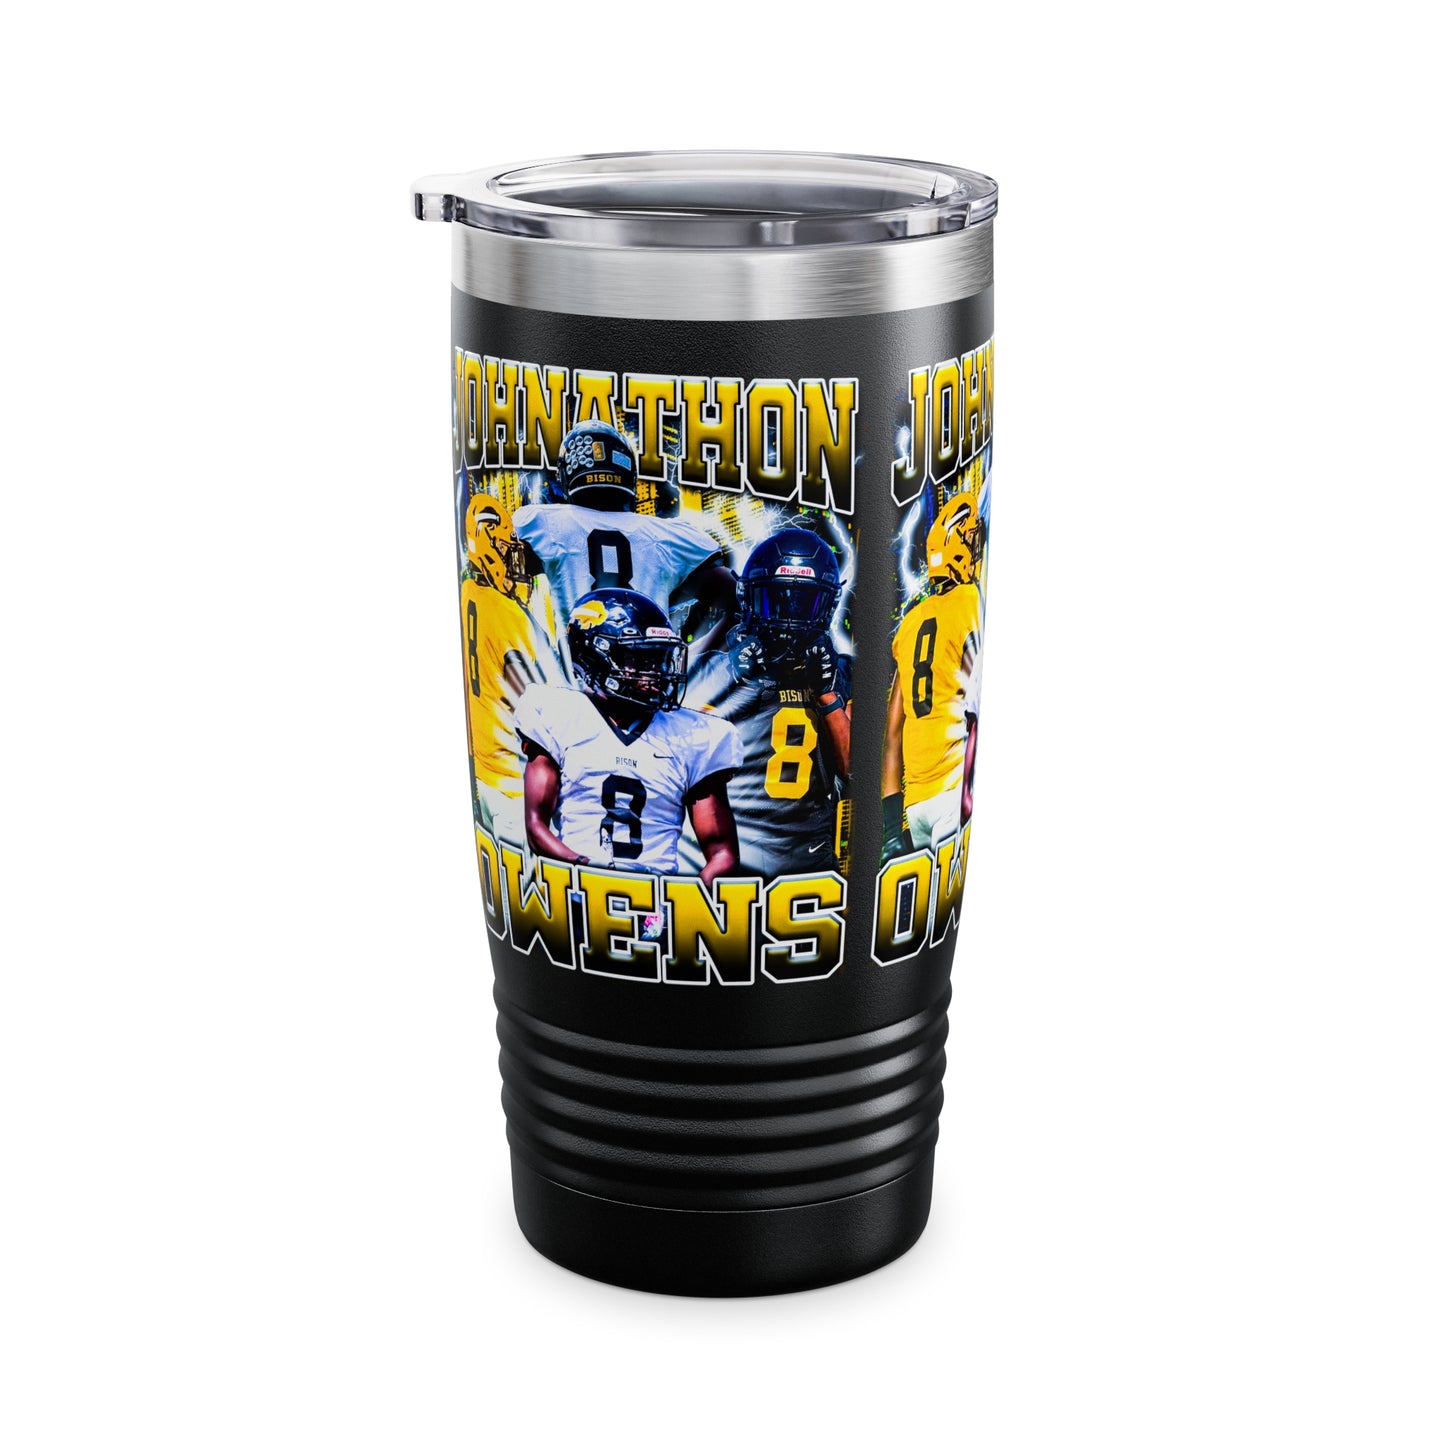 Jonathan Owens Stainless Steal Tumbler